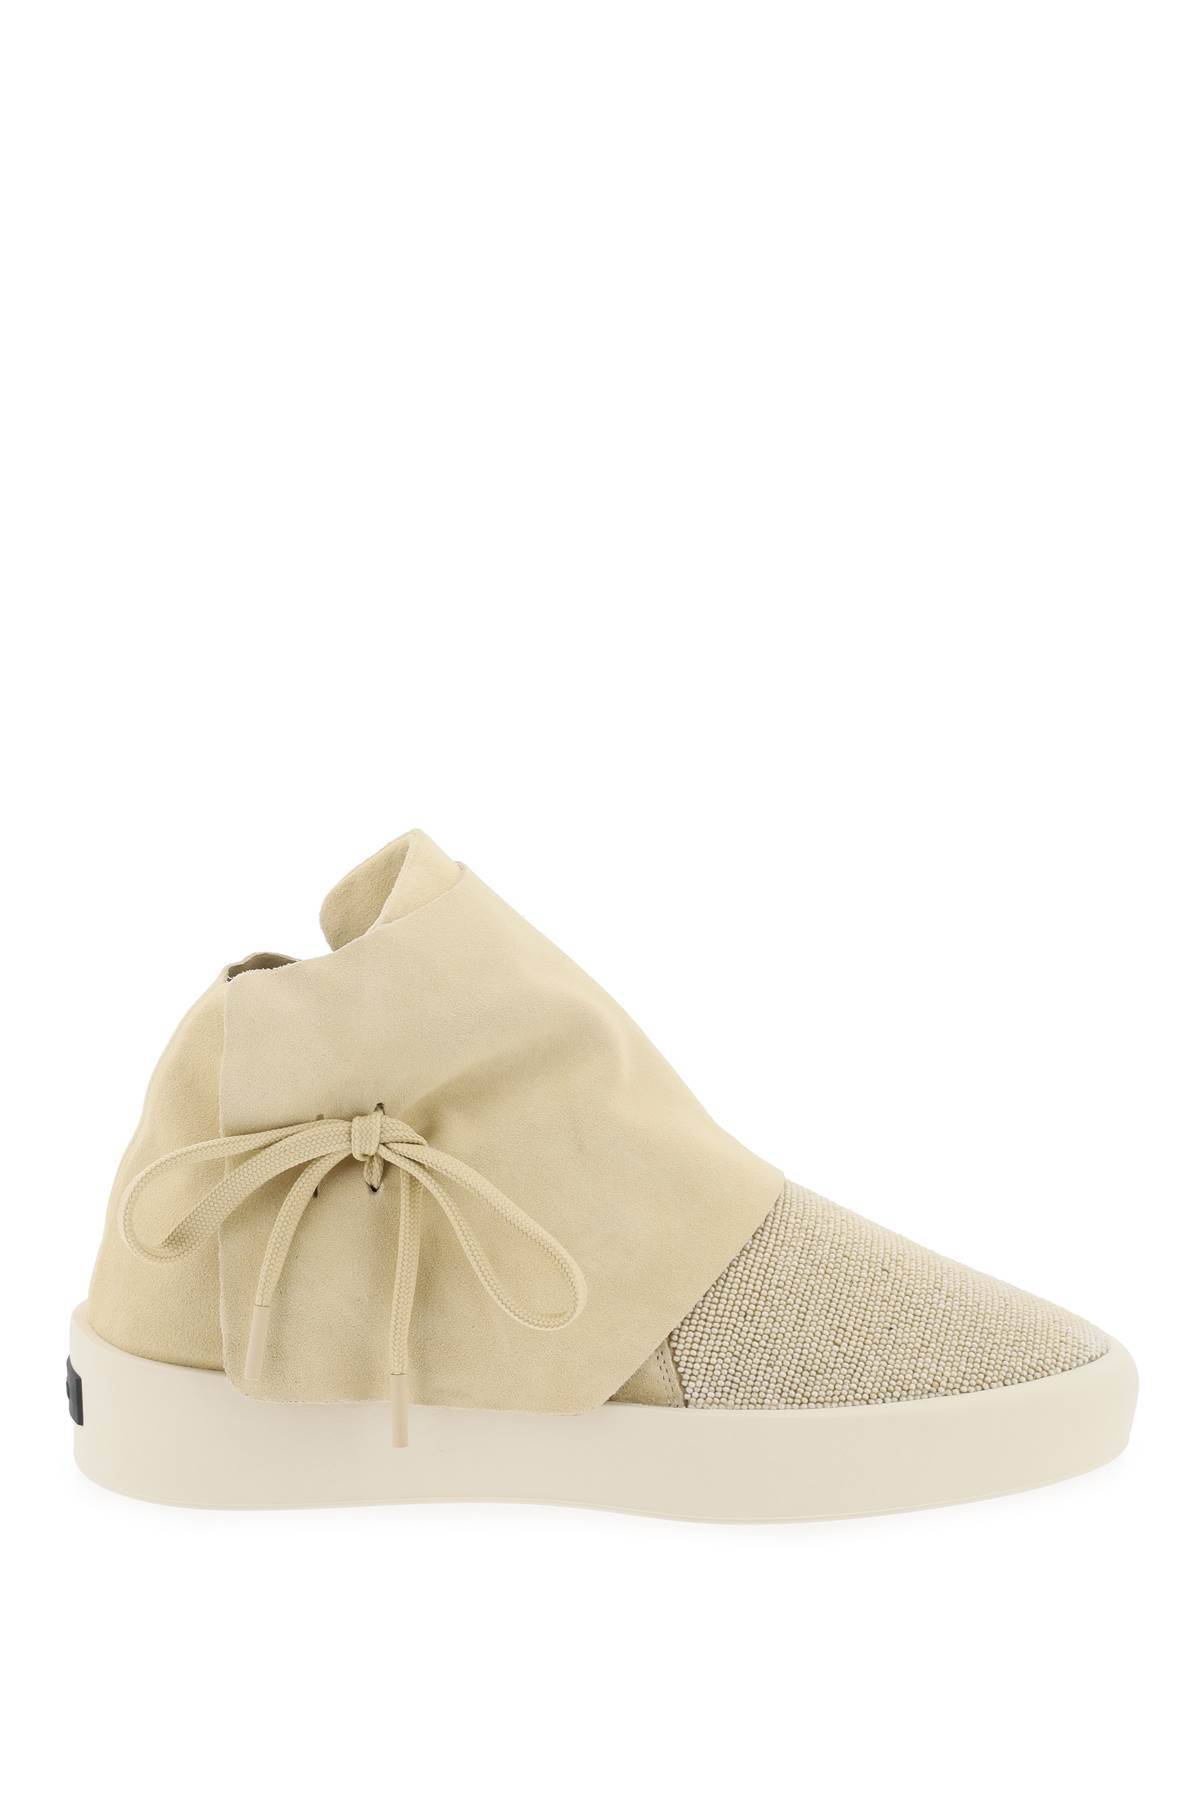 Fear Of God FEAR OF GOD mid-top suede and bead sneakers.